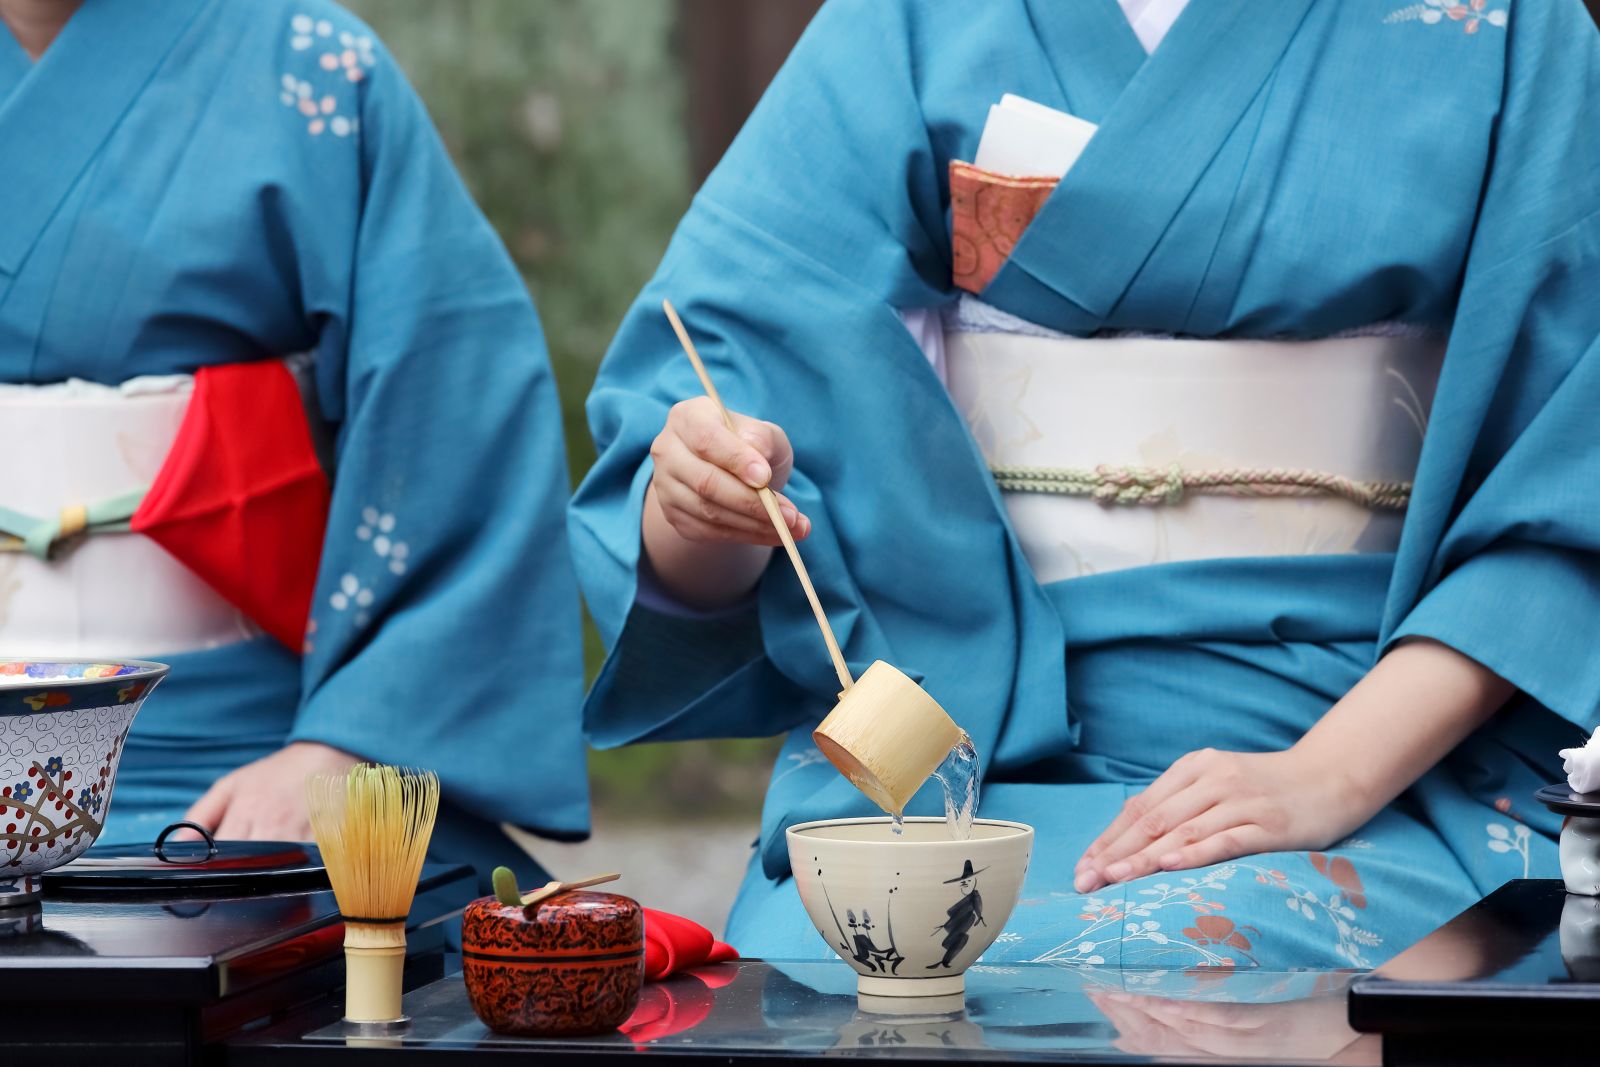 Ladies in kimonos performing a typical tea ceremony in Japan